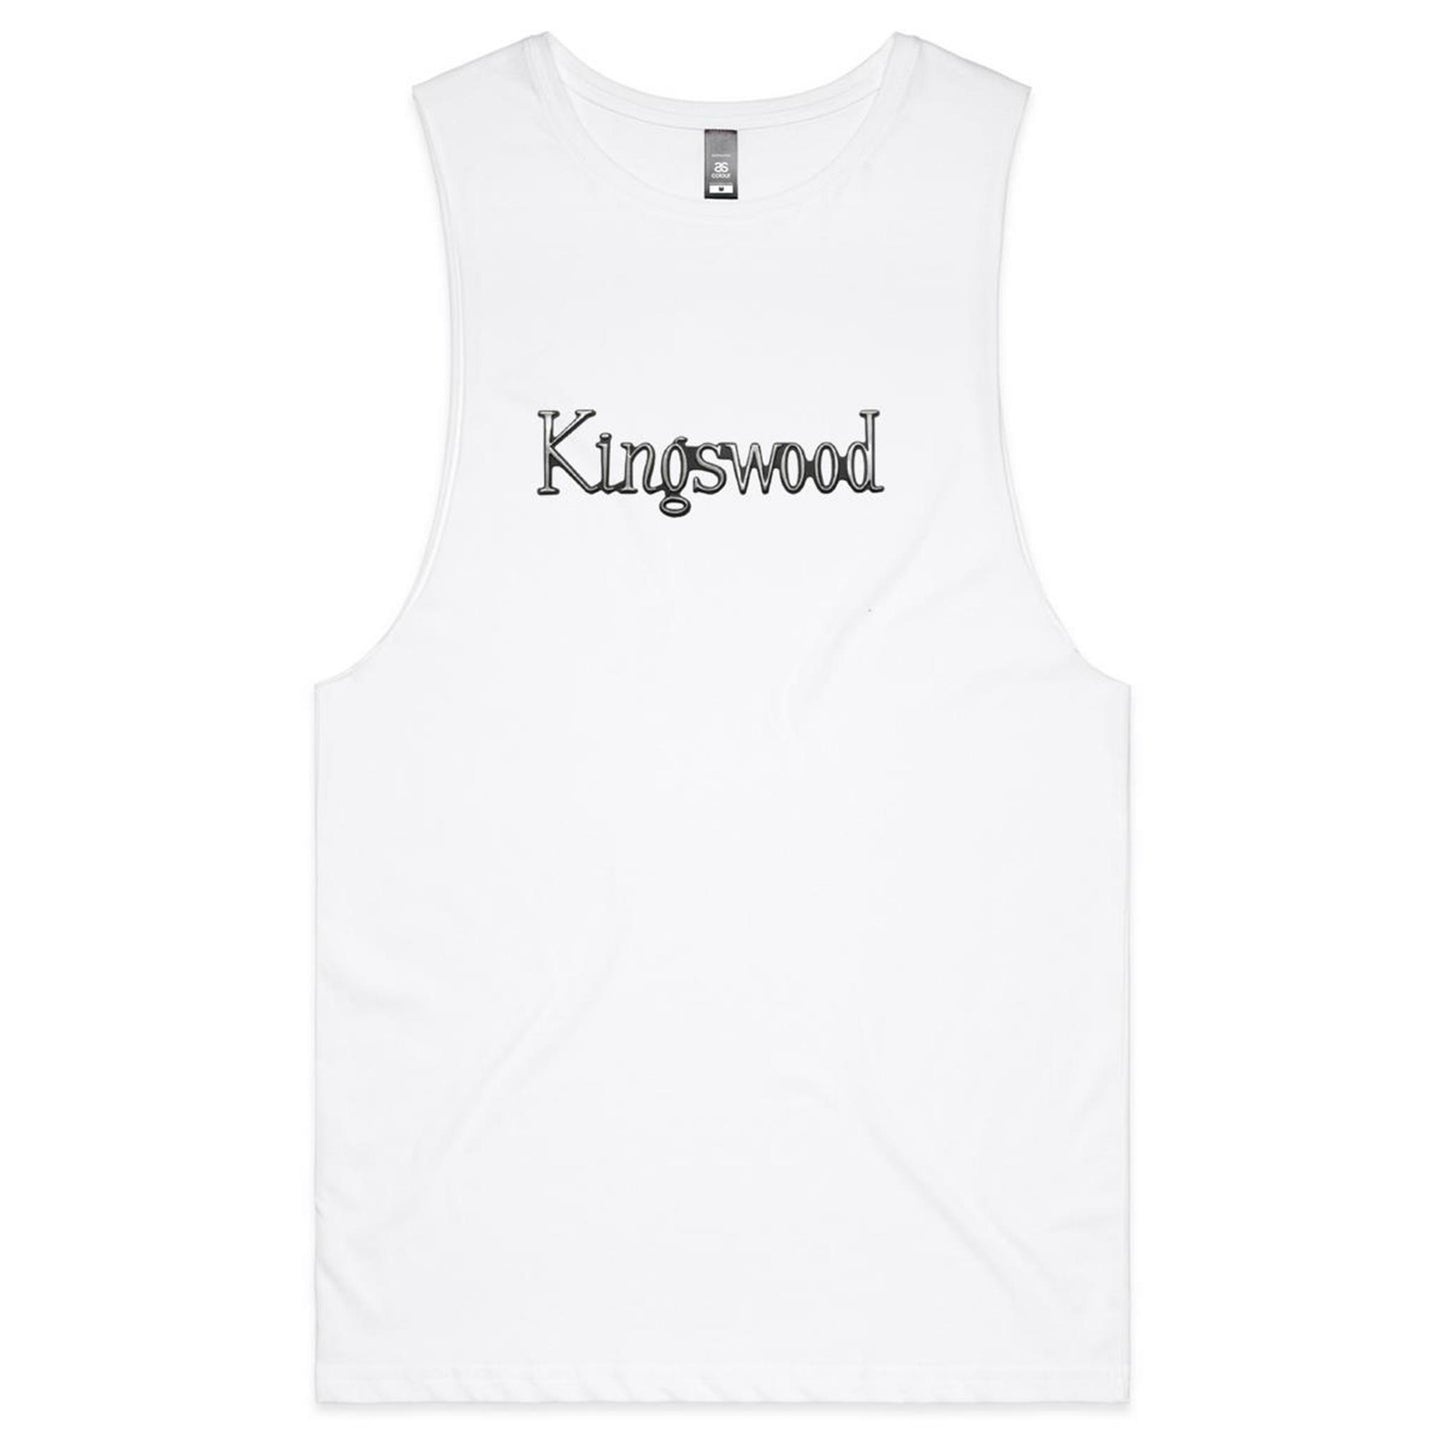 Holden Kingswood - Mens Tank Top Tee - Shed Shirts